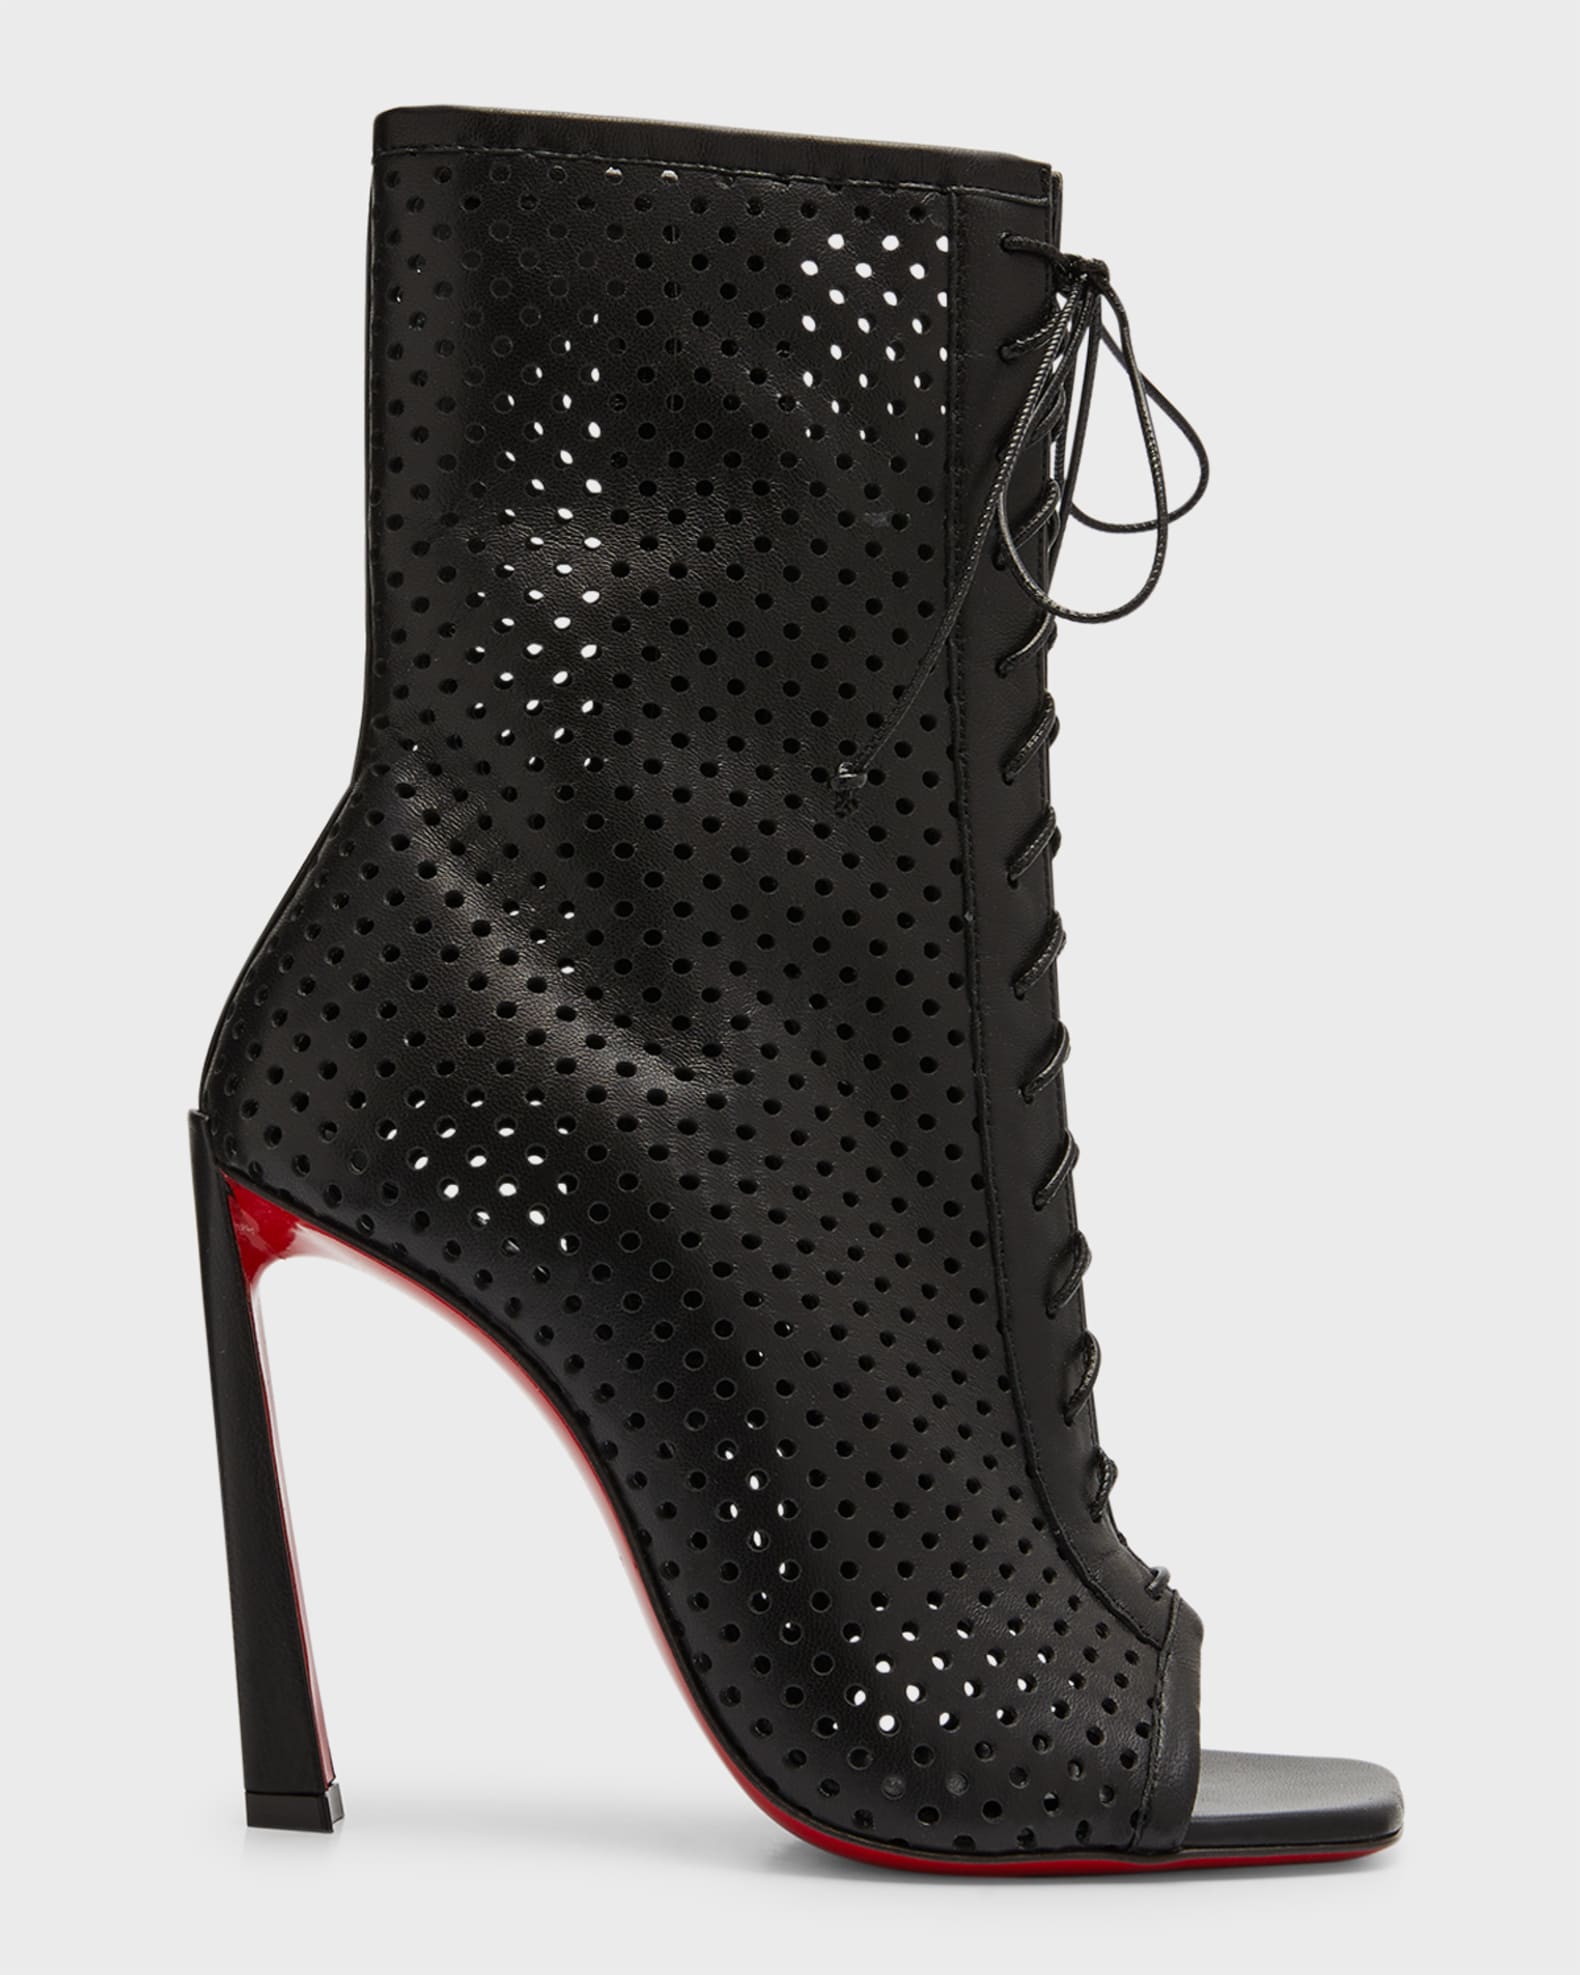 Christian Louboutin Condora Perforated Red Sole Lace-Up Booties